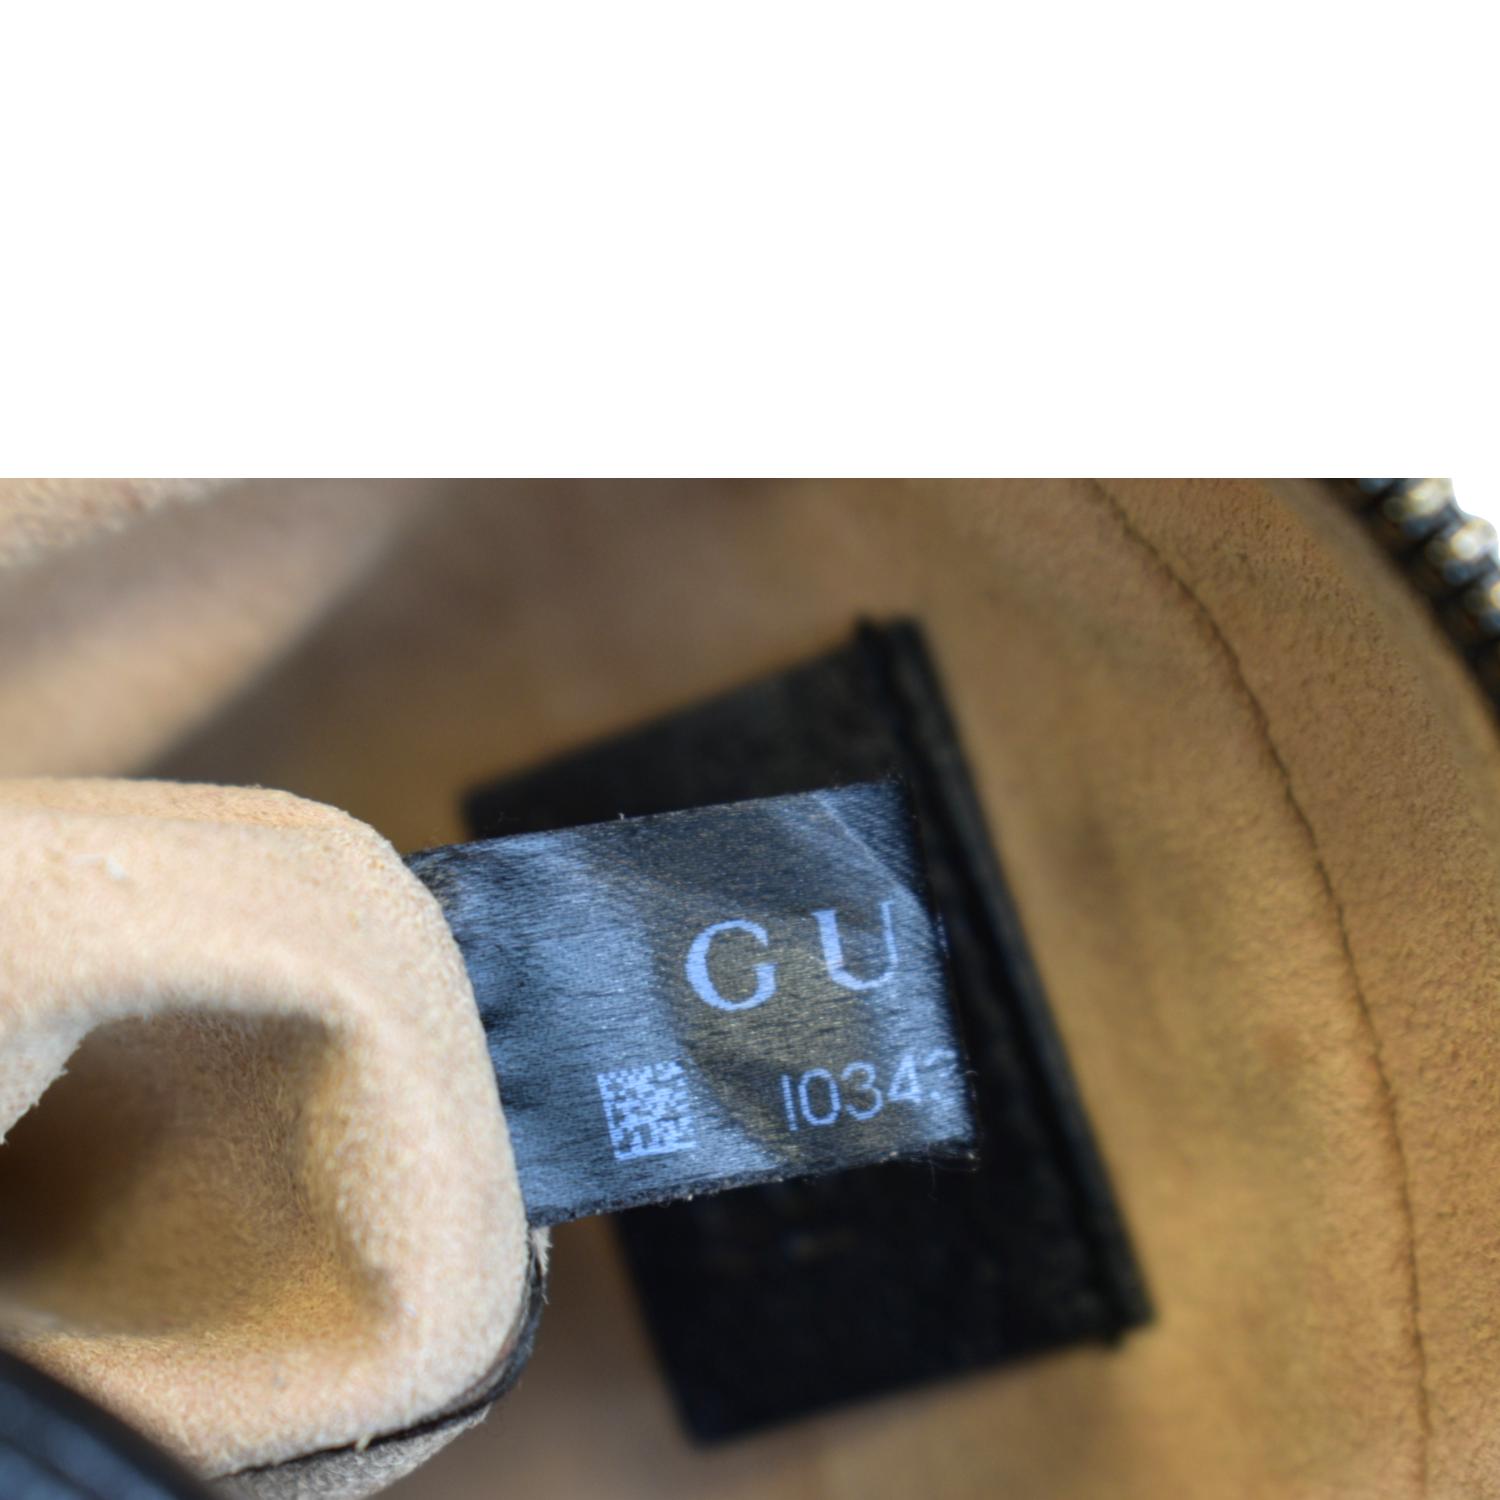 How to find the serial number on a vintage GG Marmont leather